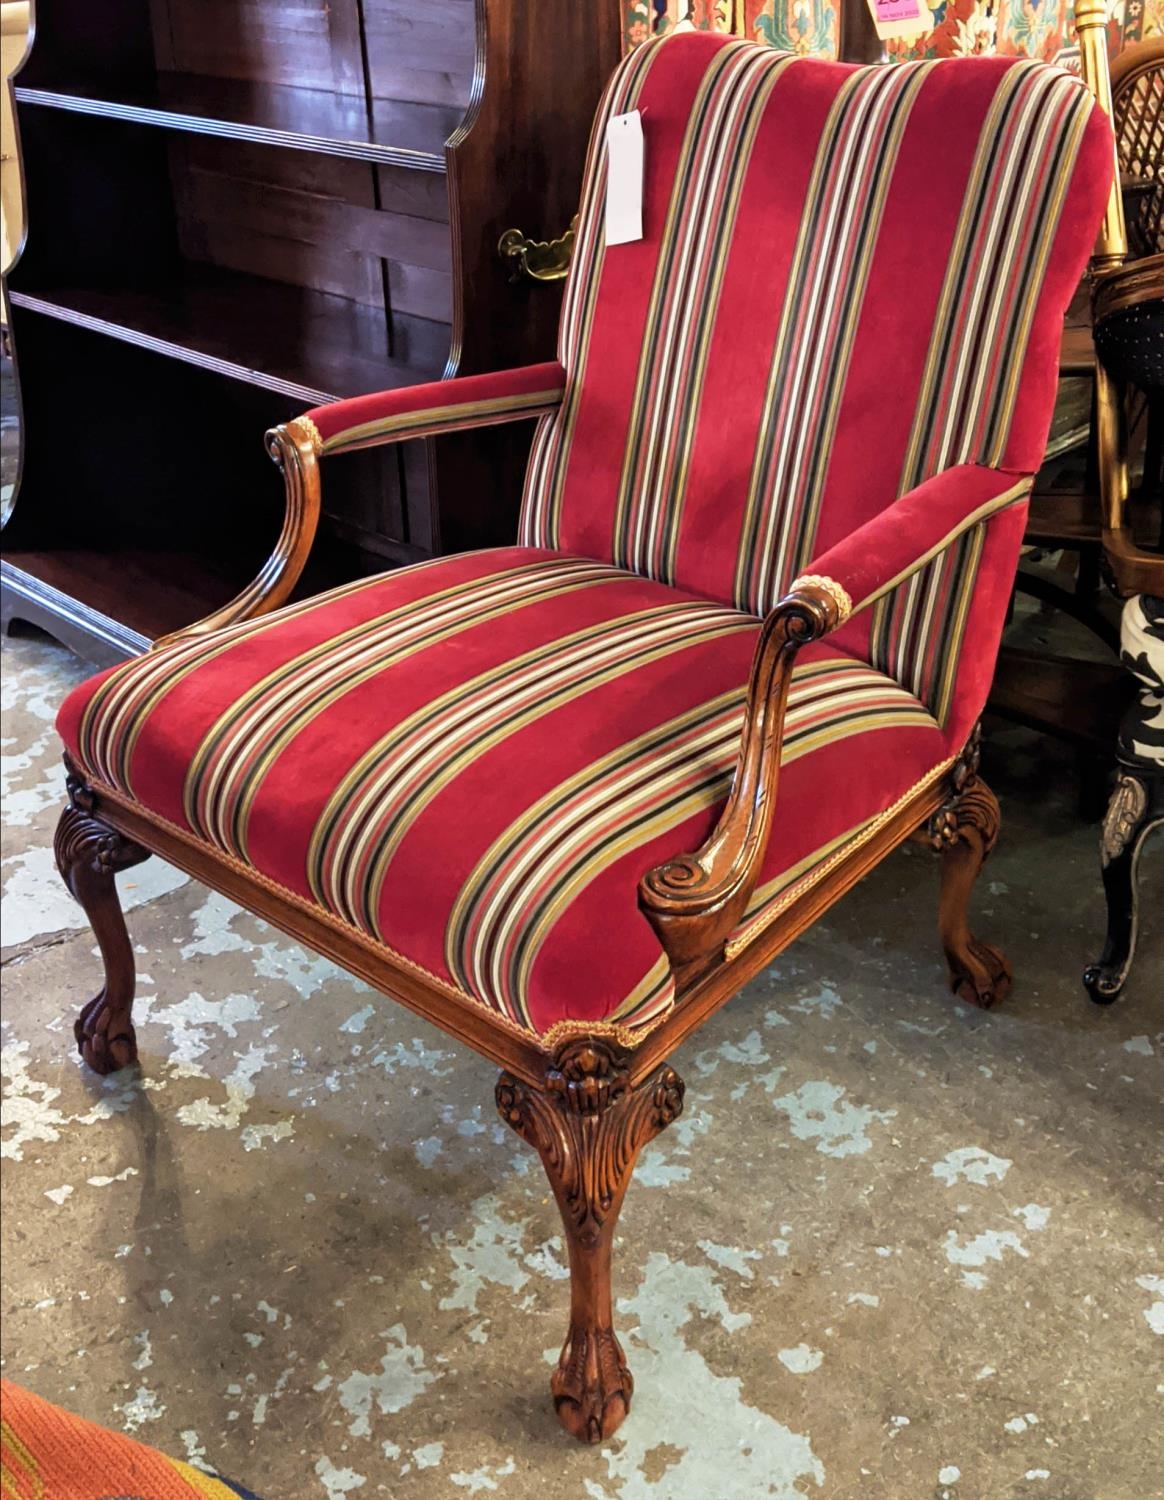 ARMCHAIR, 76cm W x 98cm H, Georgian style with striped velvet fabric and carved showframe.